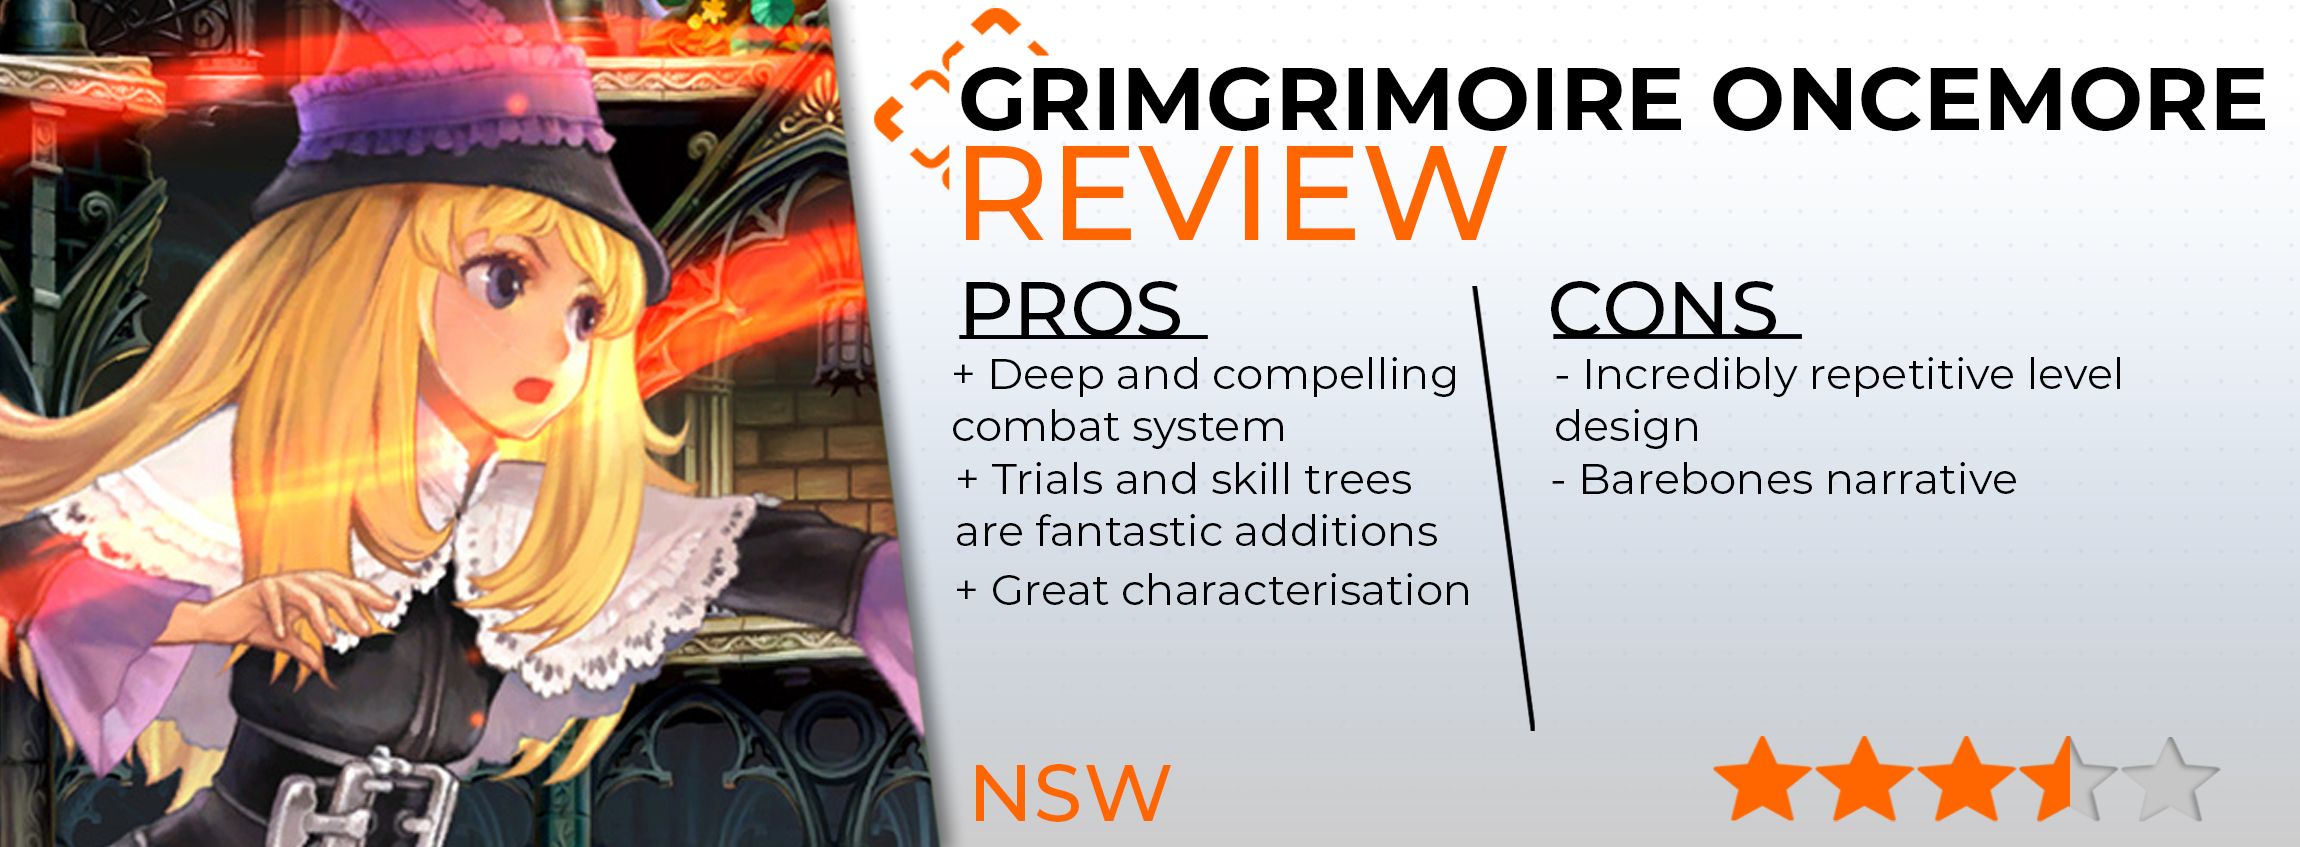 grimgrimoire_oncemore_review_card